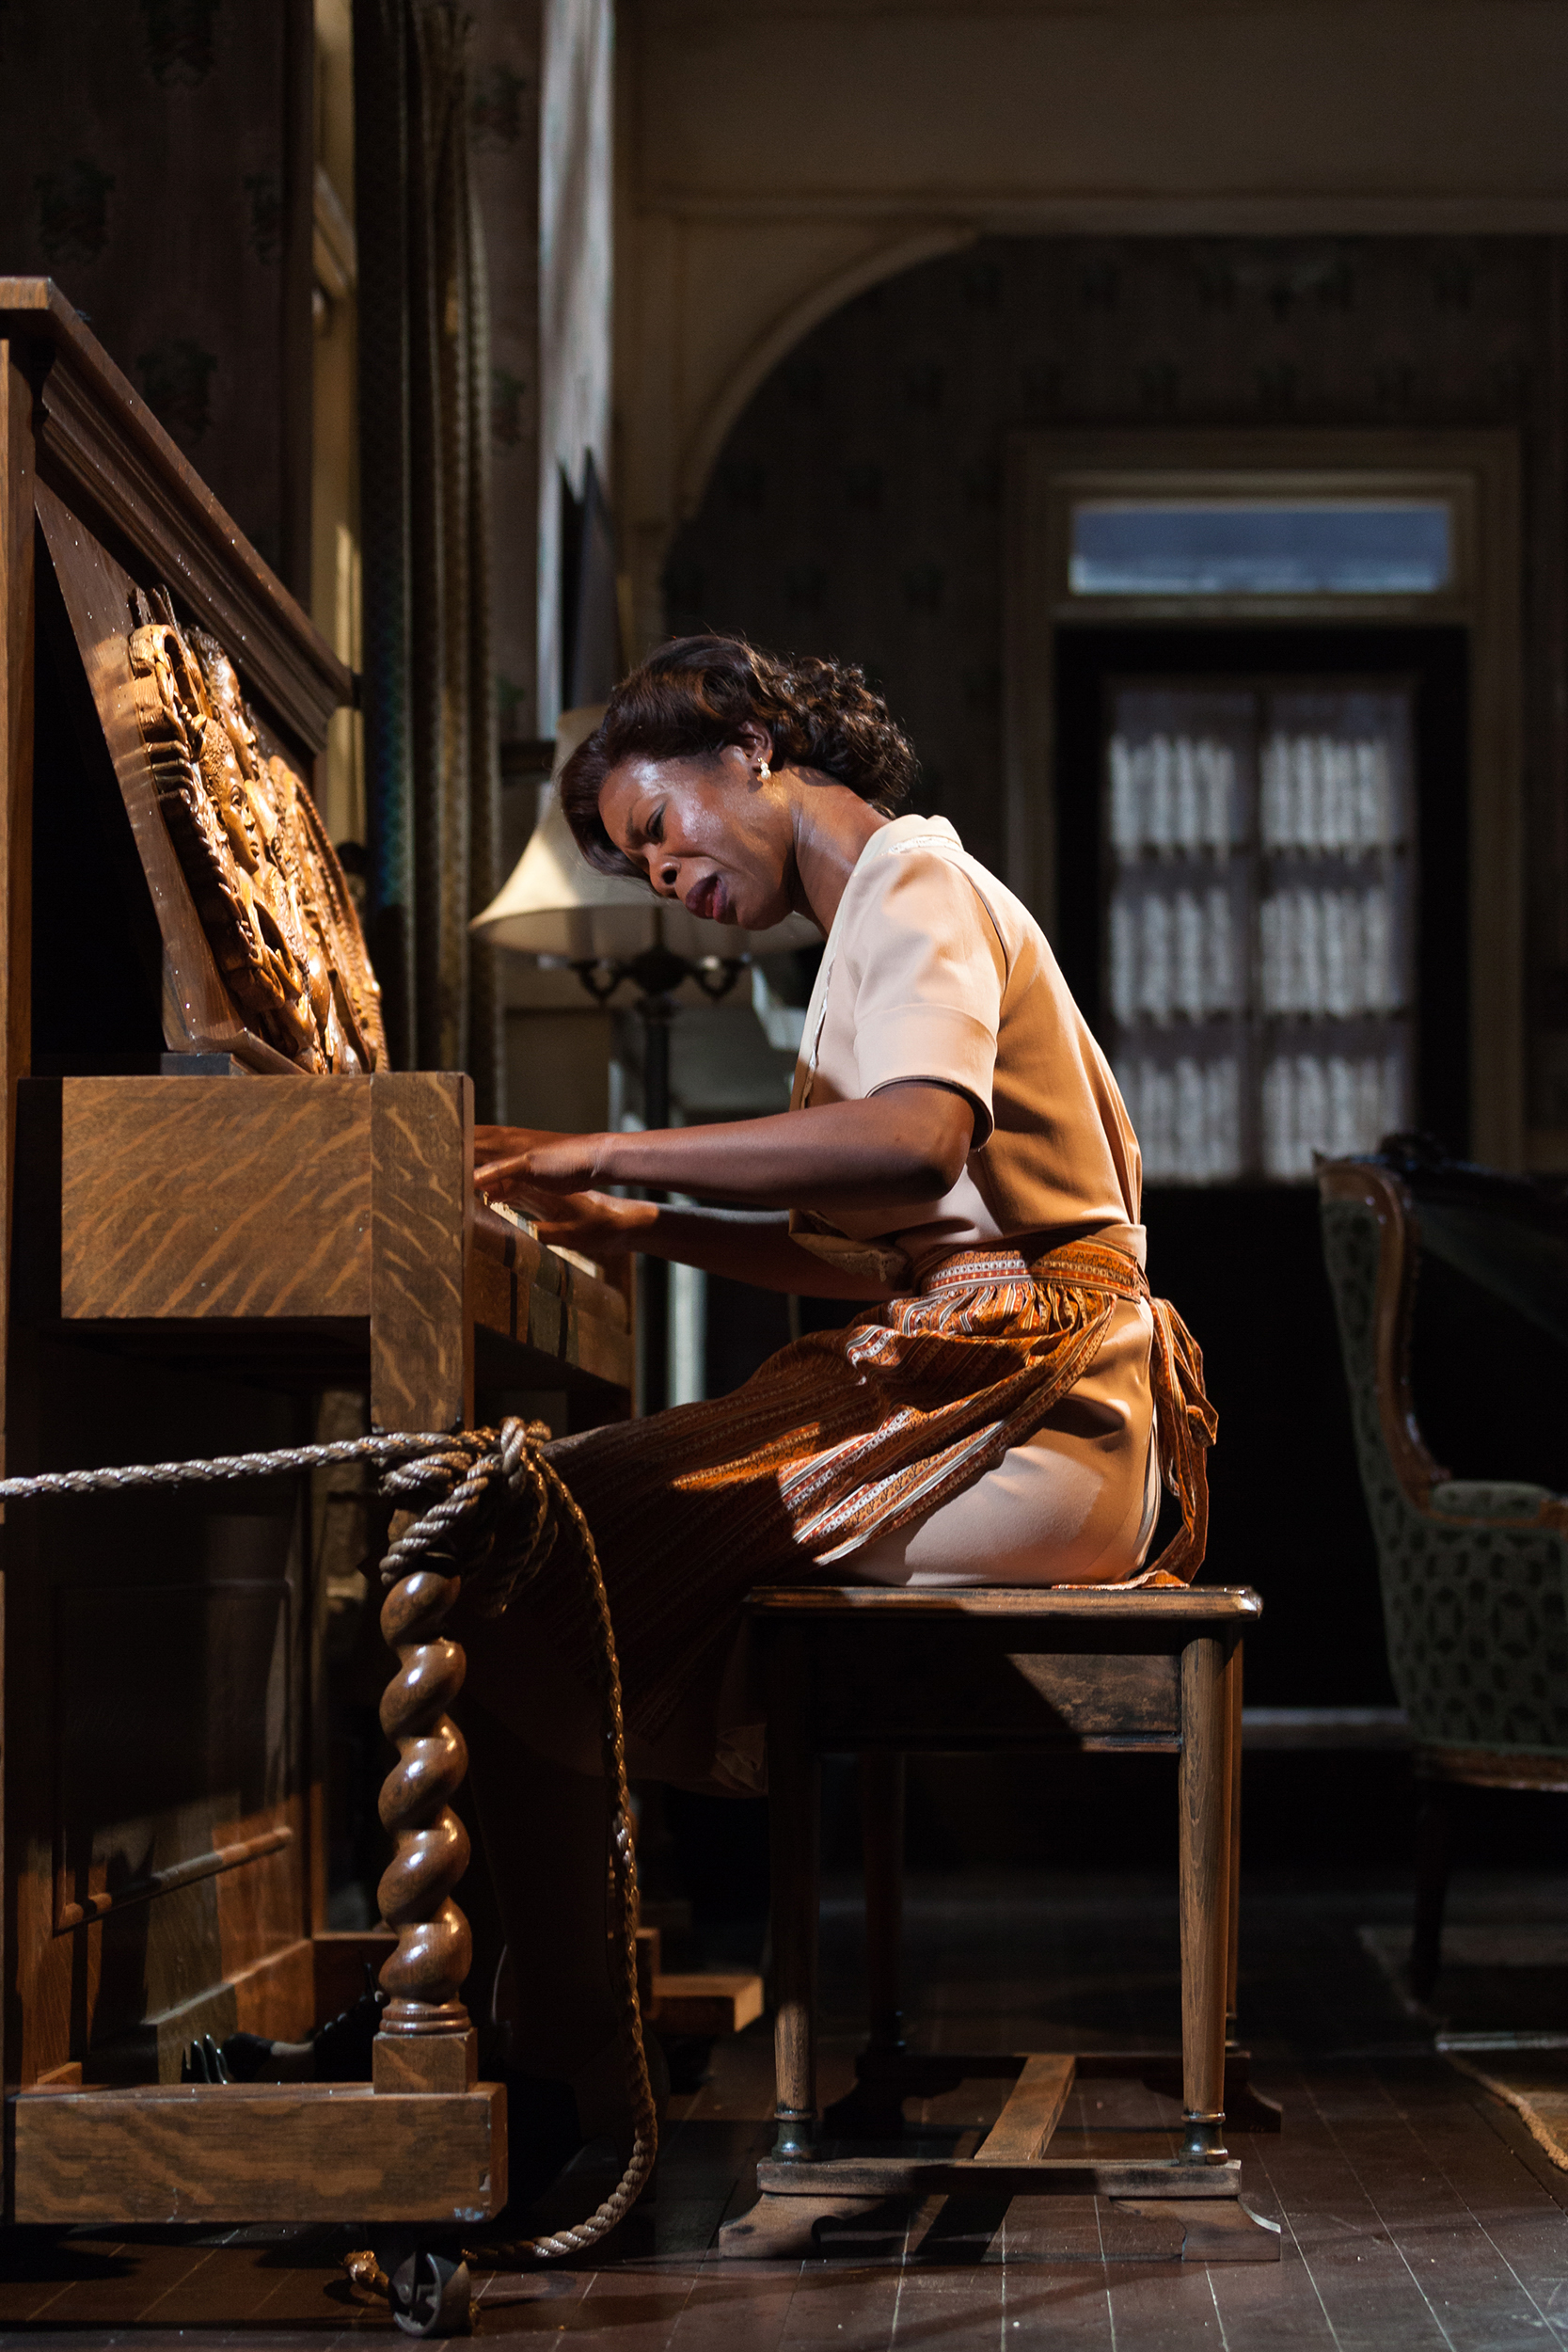  Roslyn Ruff as Berniece in the Signature Theatre’s production (2012) of August Wilson’s  The Piano Lesson . Photographed for The New York Times. 